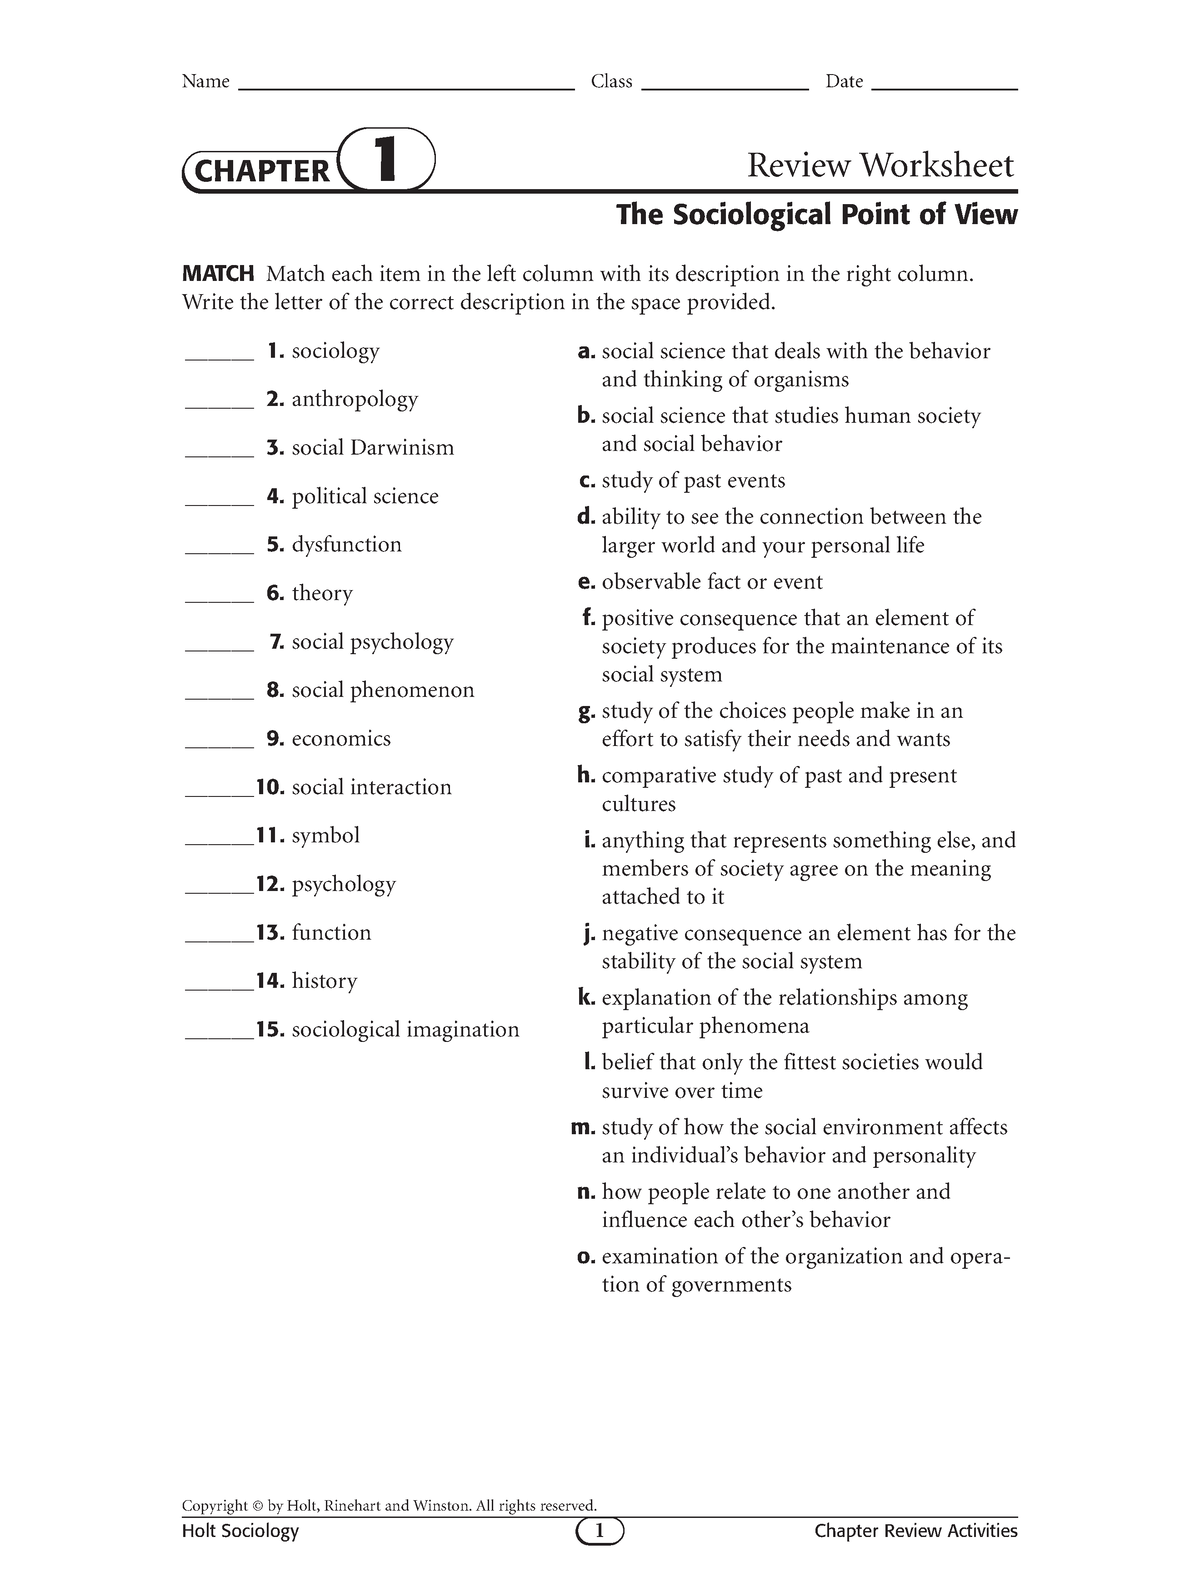 Ch 1 Review Name Class Date The Sociological Point Of View CHAPTER 1 Review Worksheet 